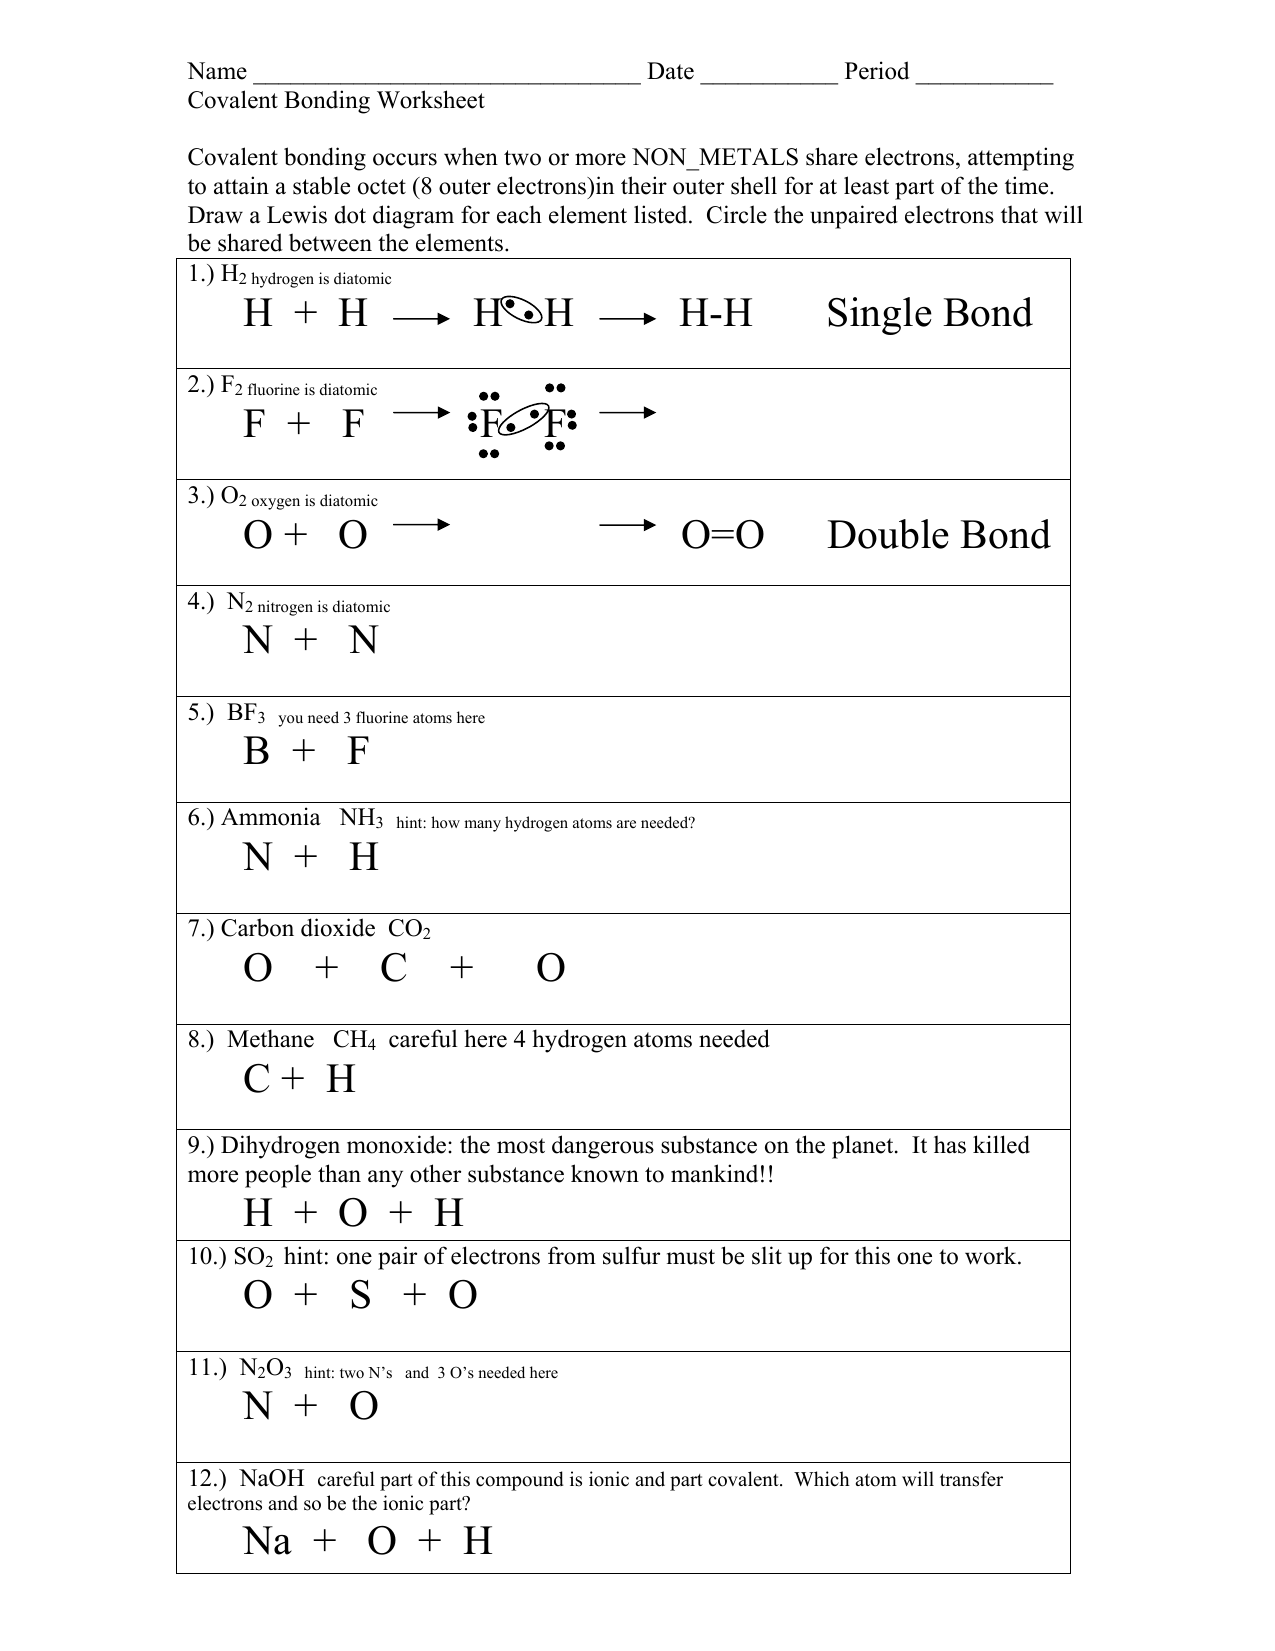 Types of Chemical Bonds Worksheet Throughout Covalent Bonding Worksheet Answers